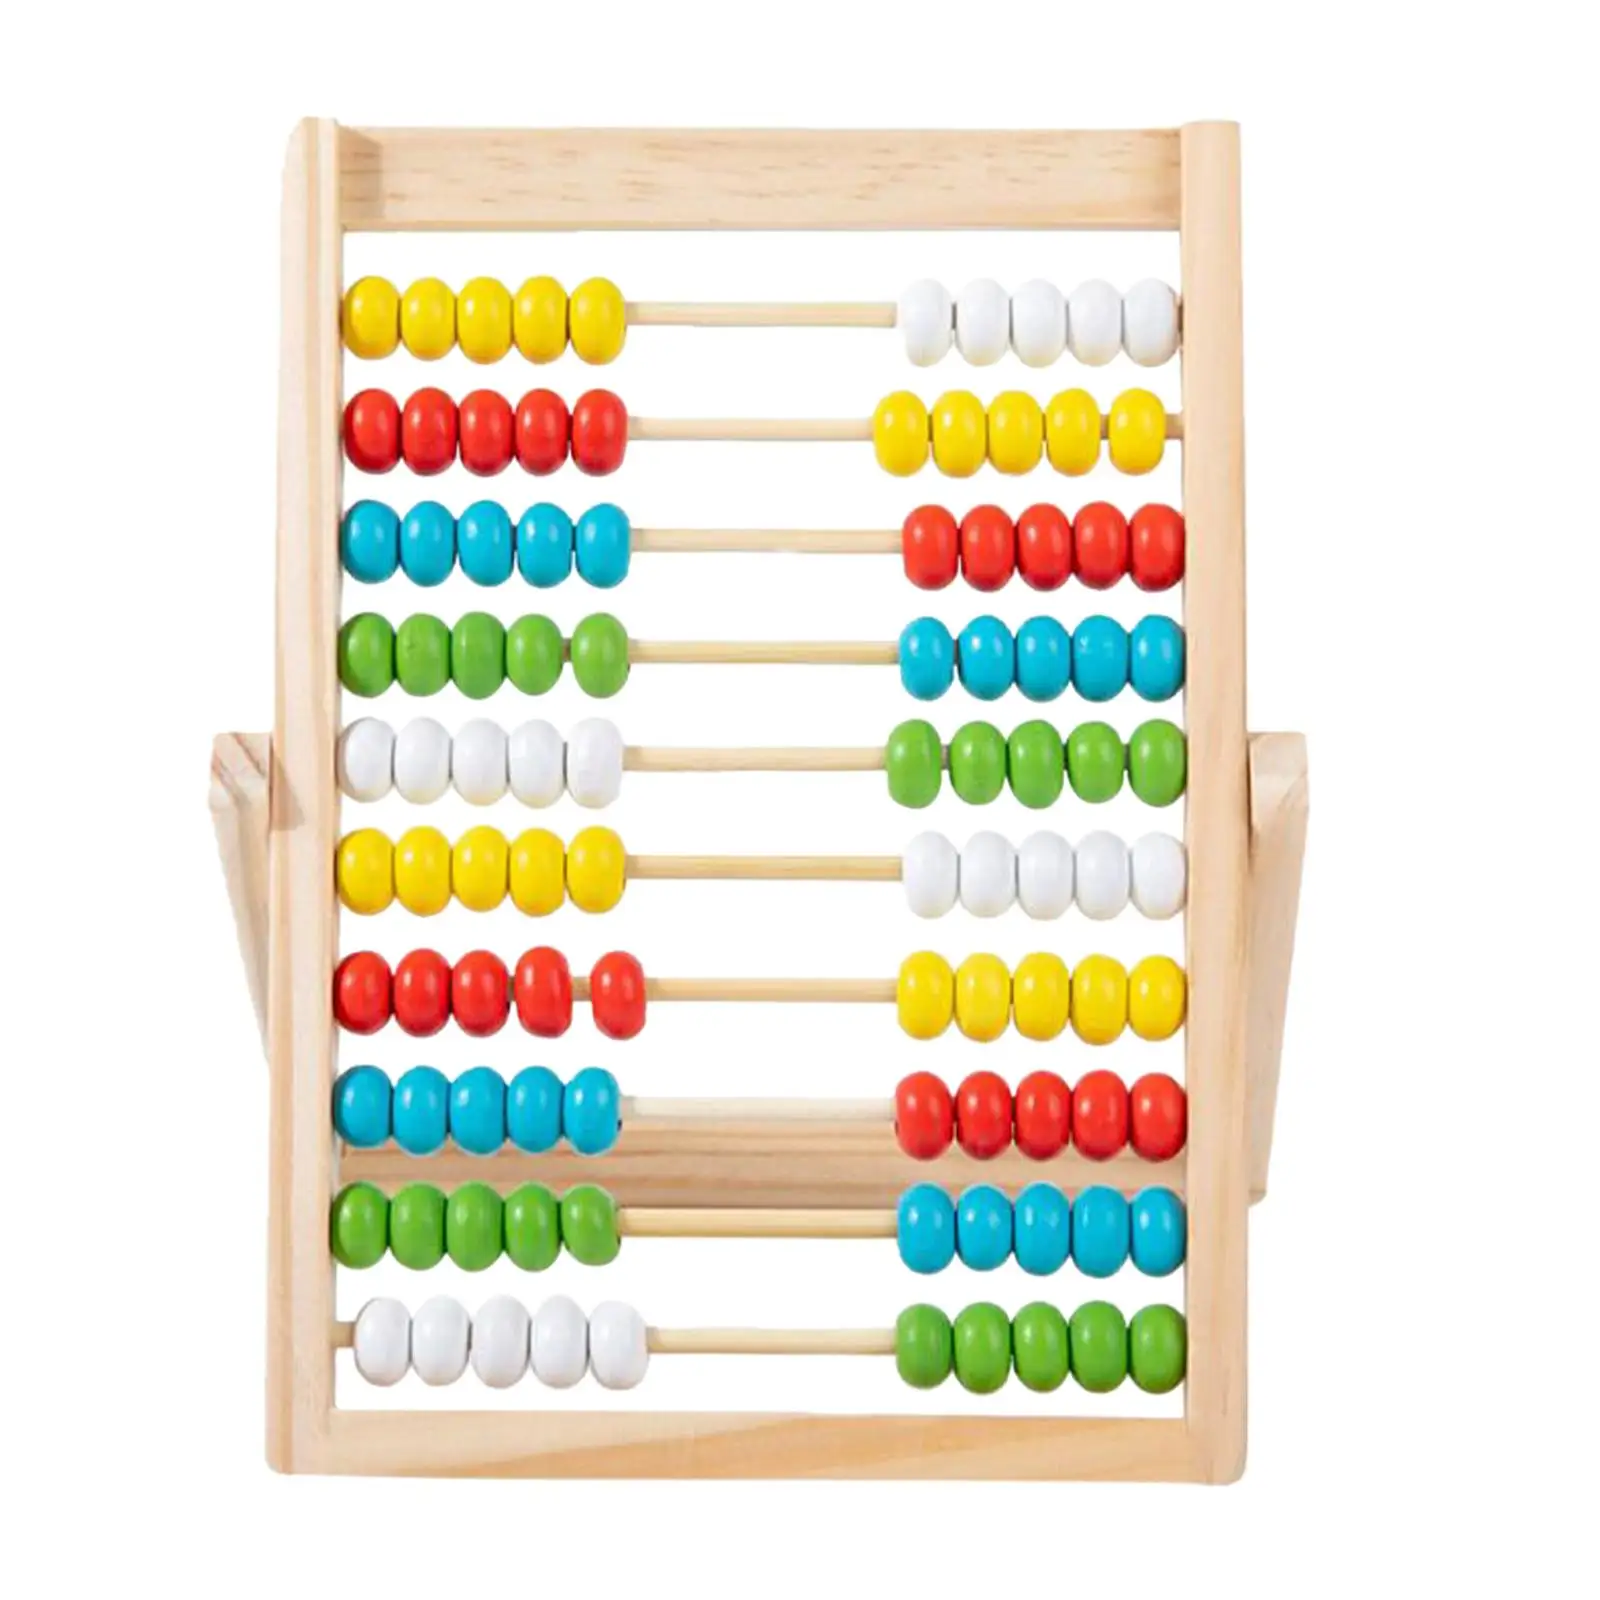 Wooden Abacus Educational Counting Frames Toy 100 Beads Math Learning Math Counting Frame Educational Toy for Boys